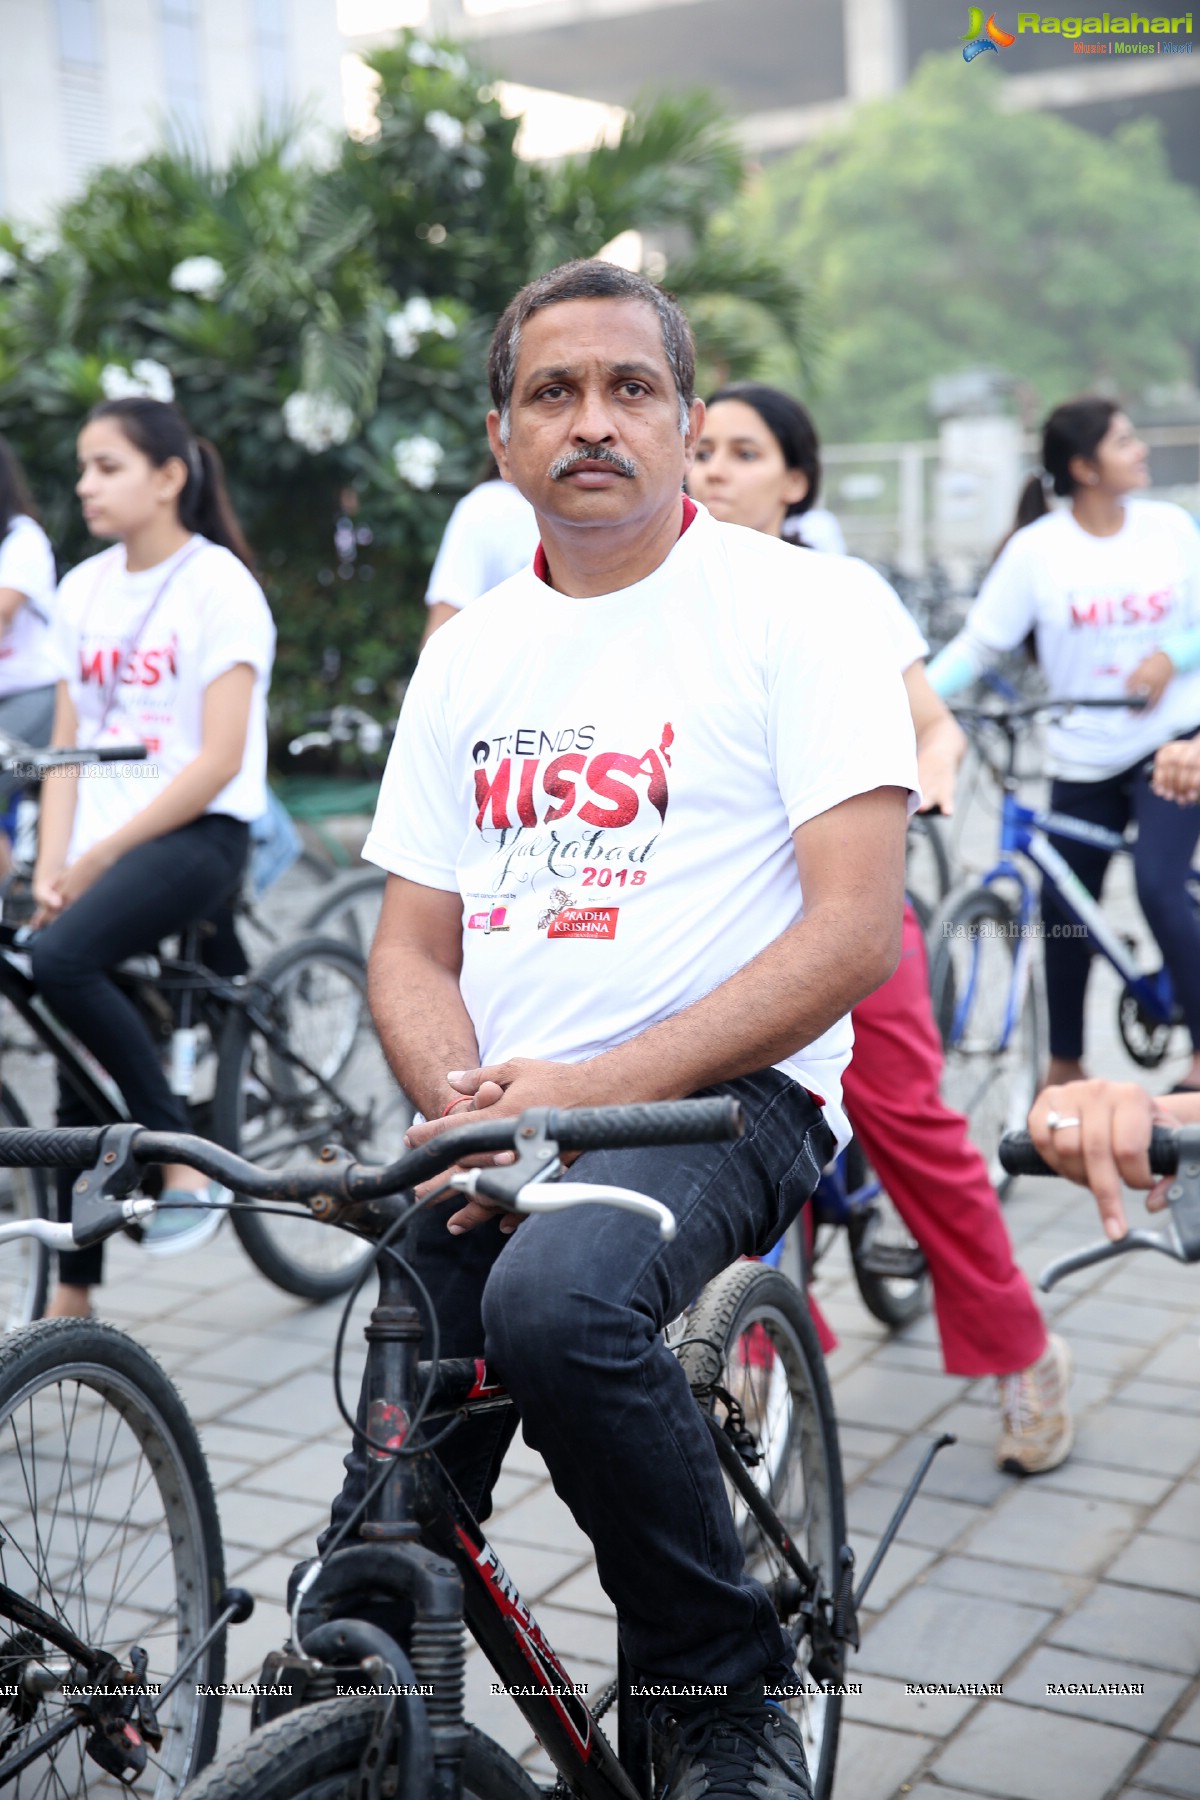 Green Ride - Cycle Ride By Miss Hyderabad Finalists to Promote Green Initiative